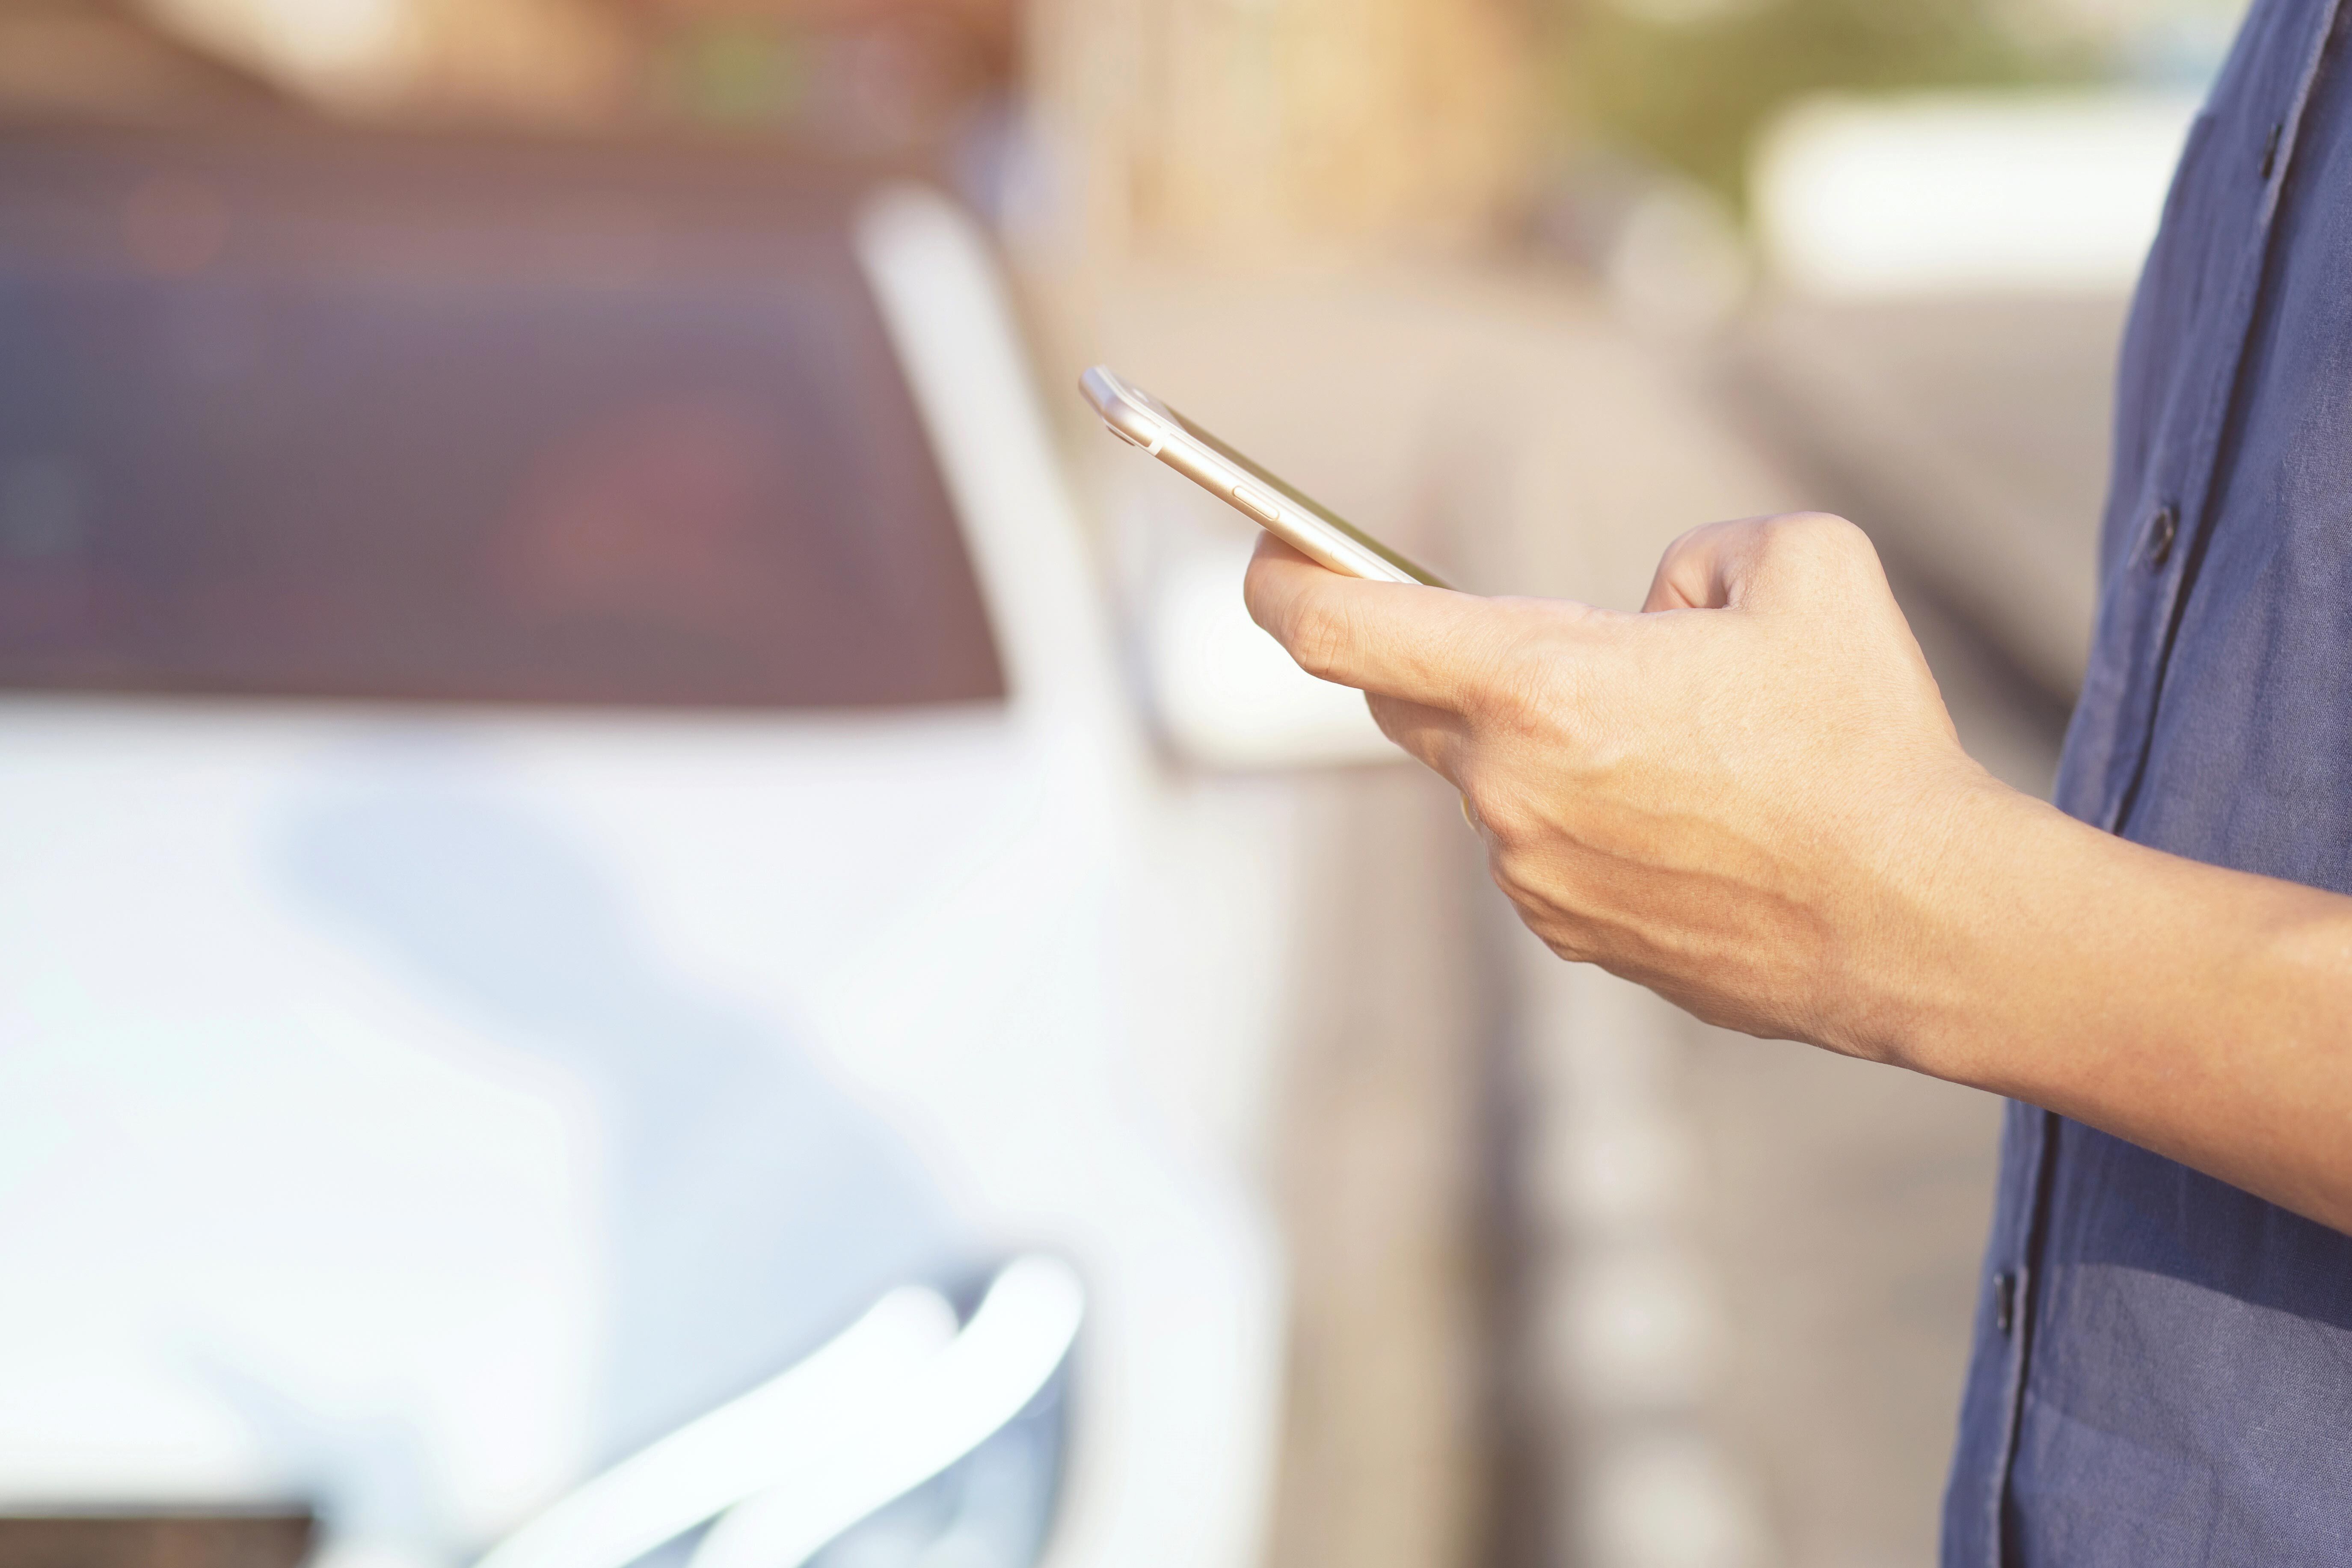 Schedule and sell your car on your mobile device